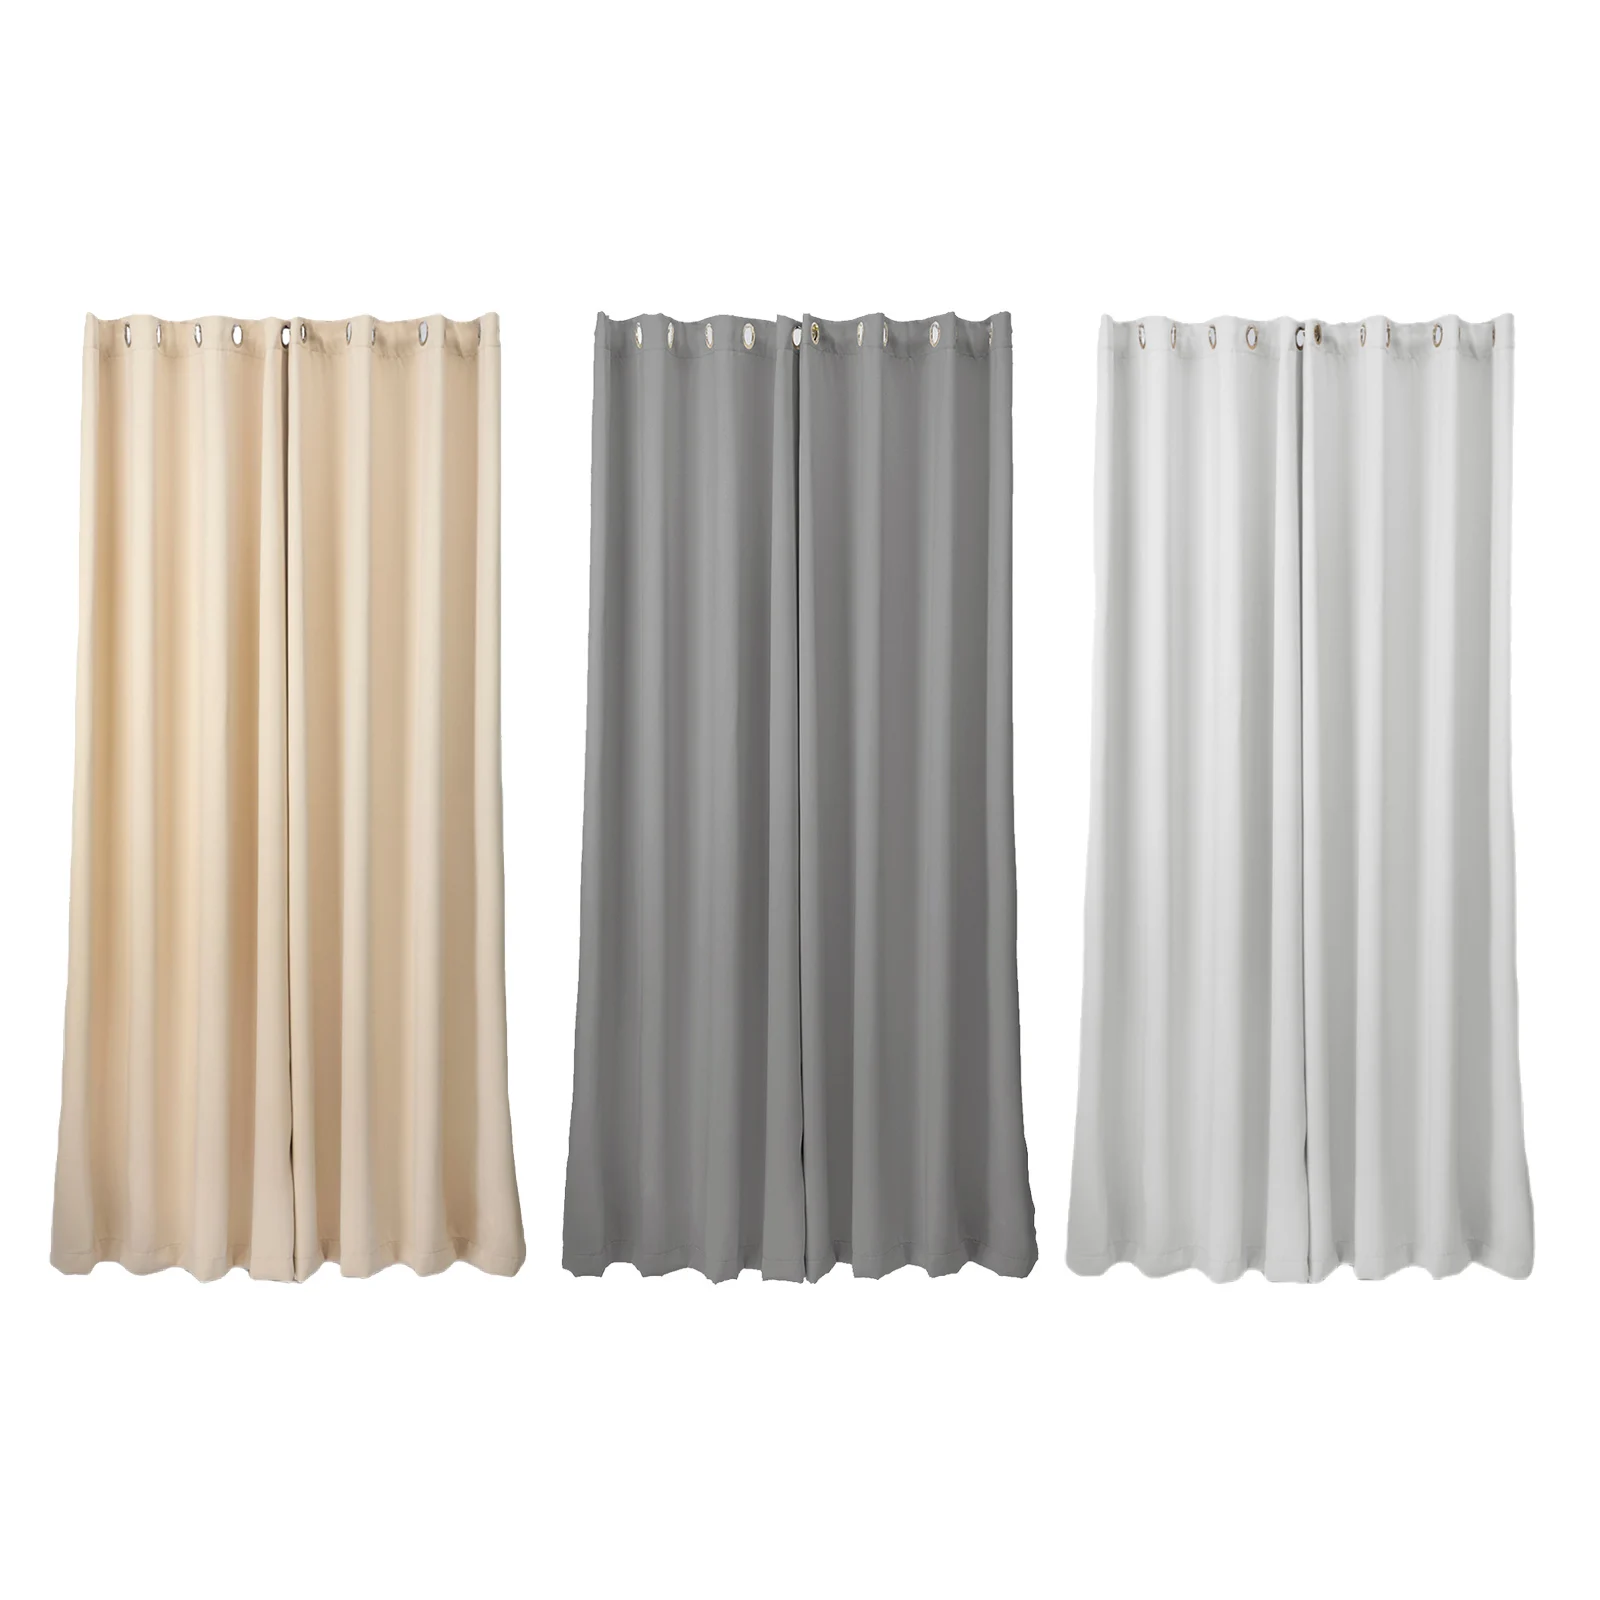 Solid Outdoor Curtain Grommet Top Blackout Thermal Insulated Drape Porch